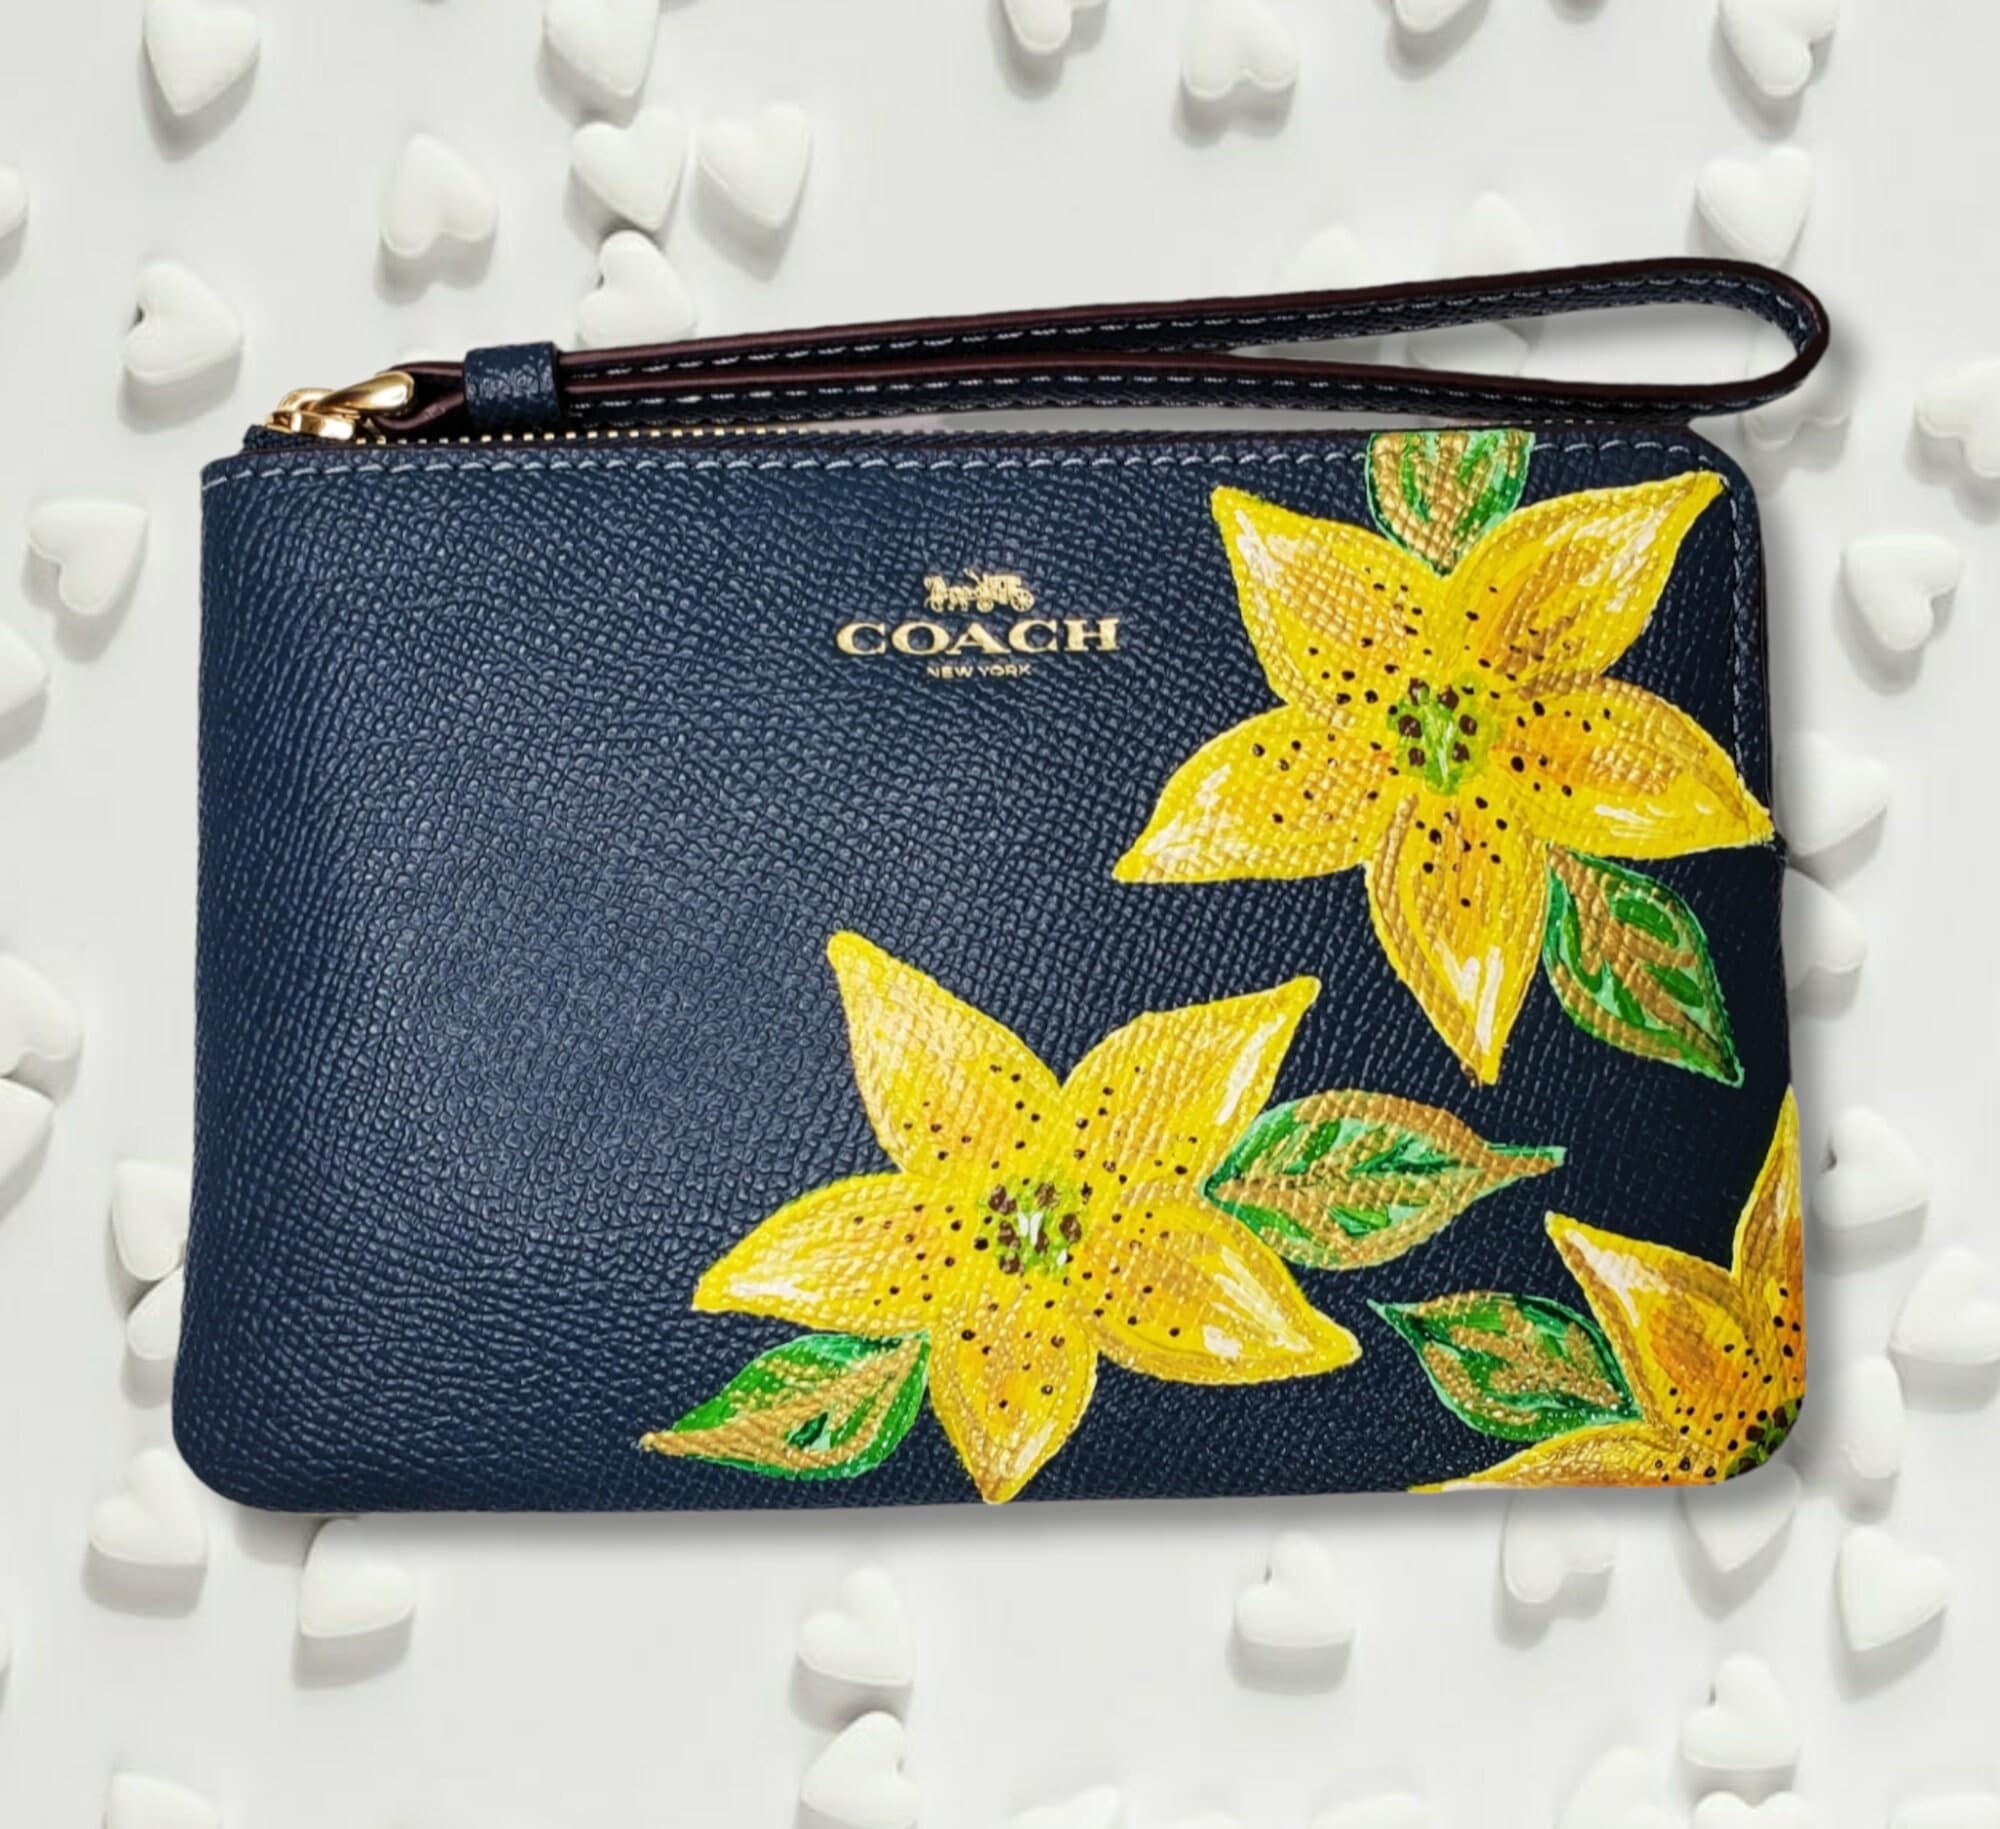 COACH Small Wallet With Flower Patch Print